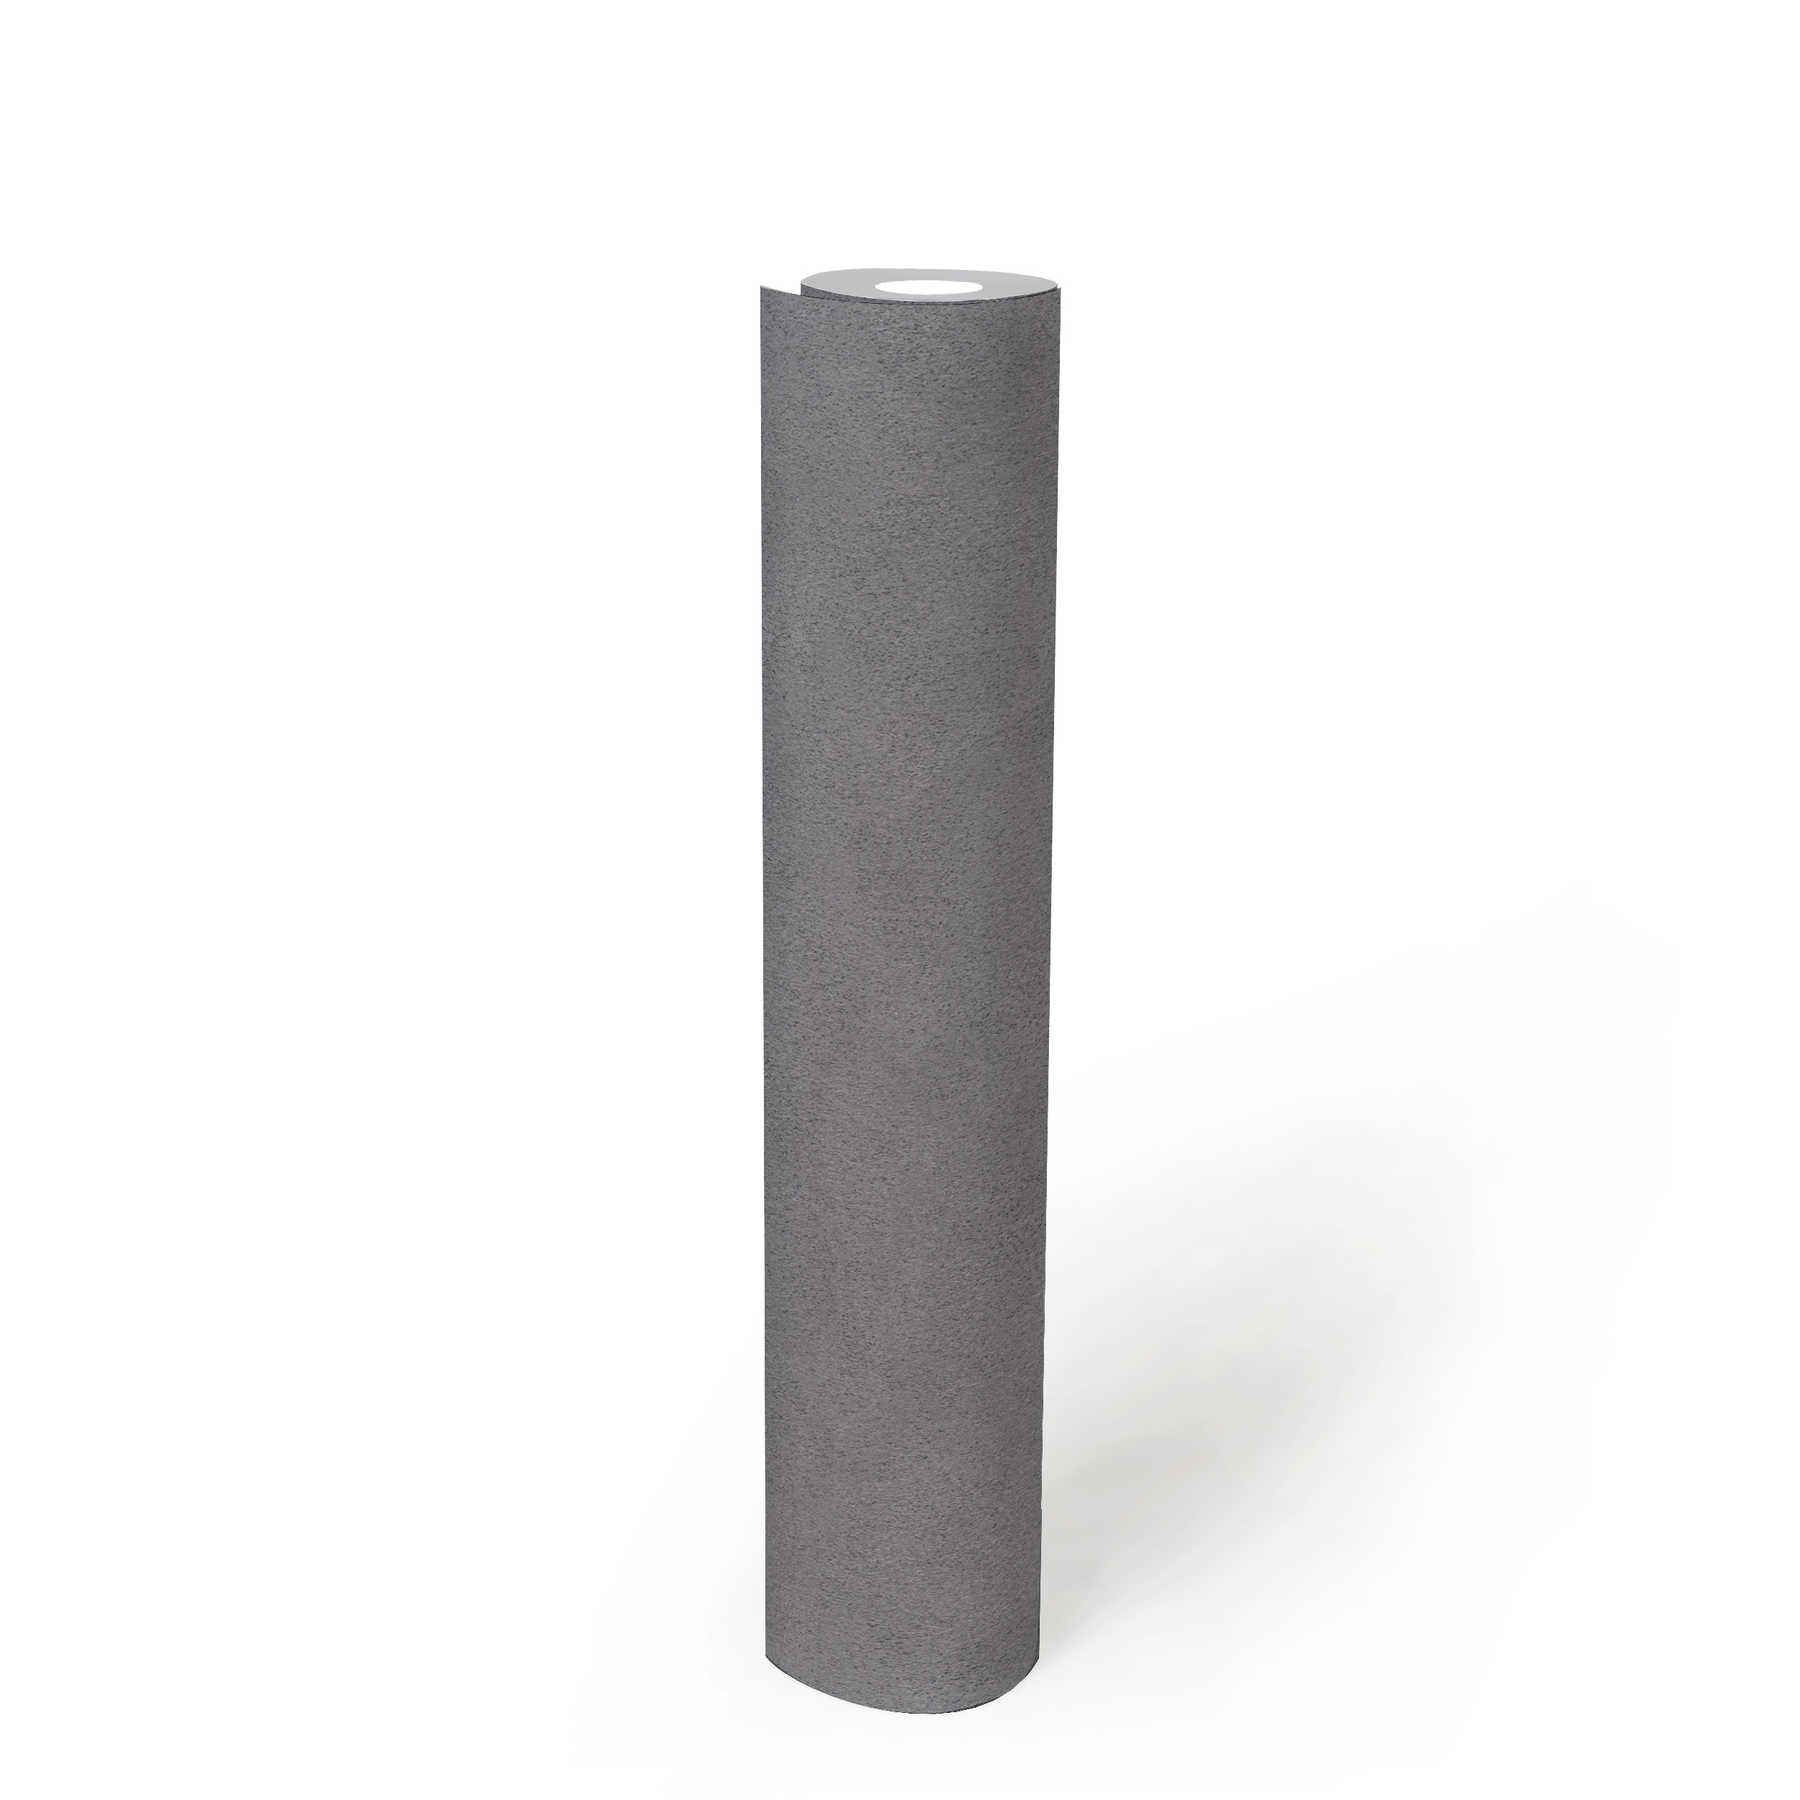             Non-woven wallpaper smooth grey mottled with stone look
        